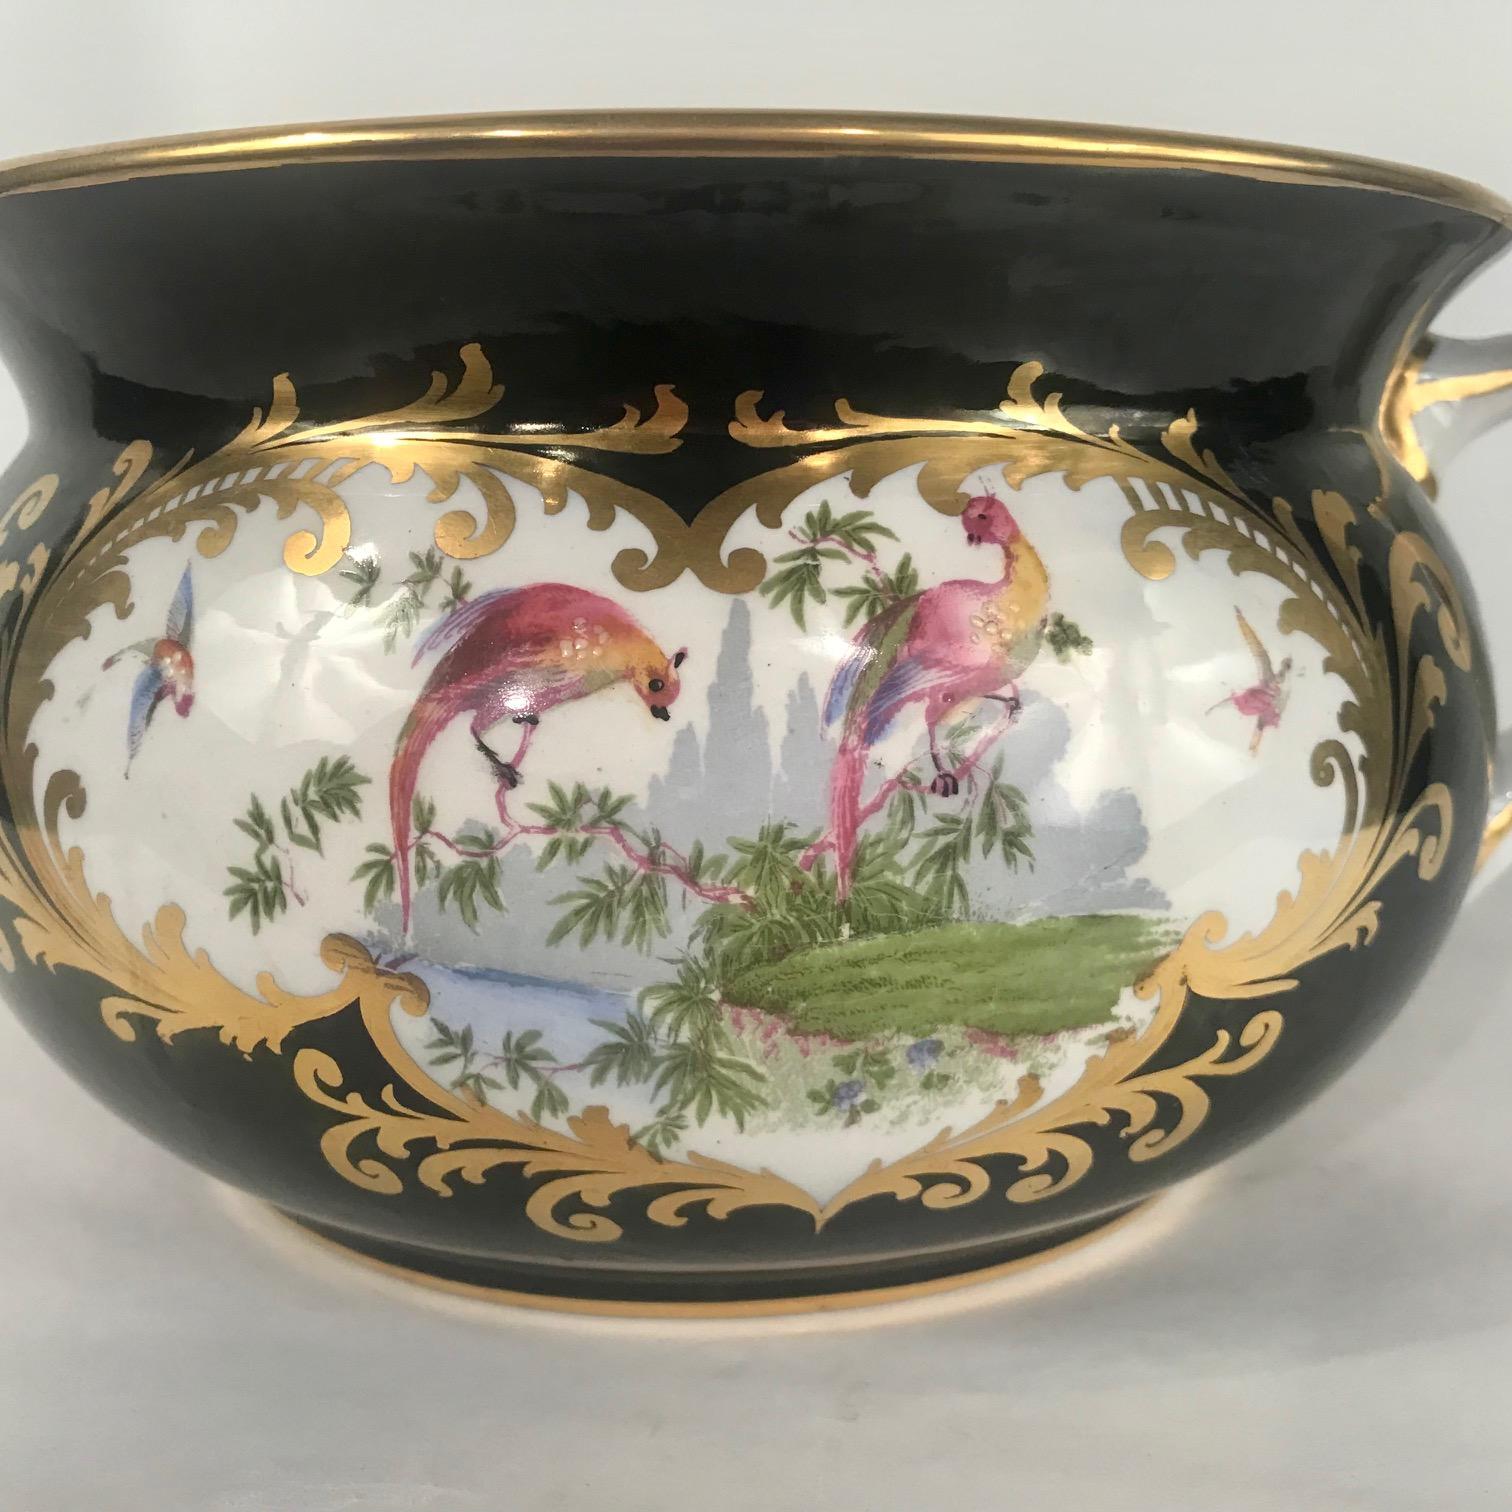 English George Jones Crescent Chamber Pot in the Manner of First Period Worcester For Sale